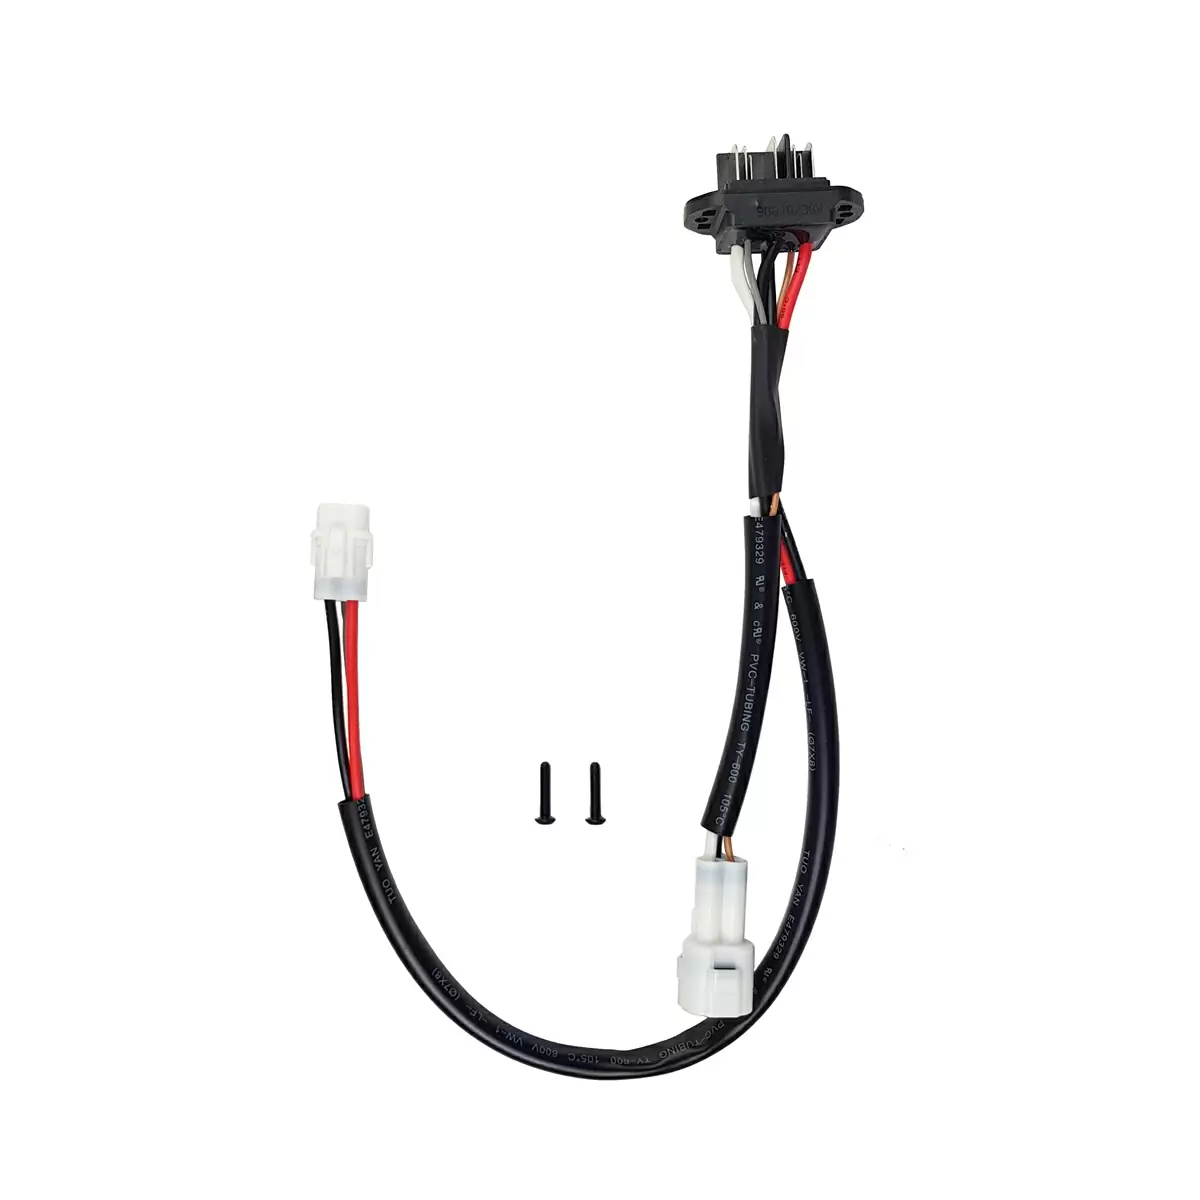 Snake 500wh motor - battery connection cable - image